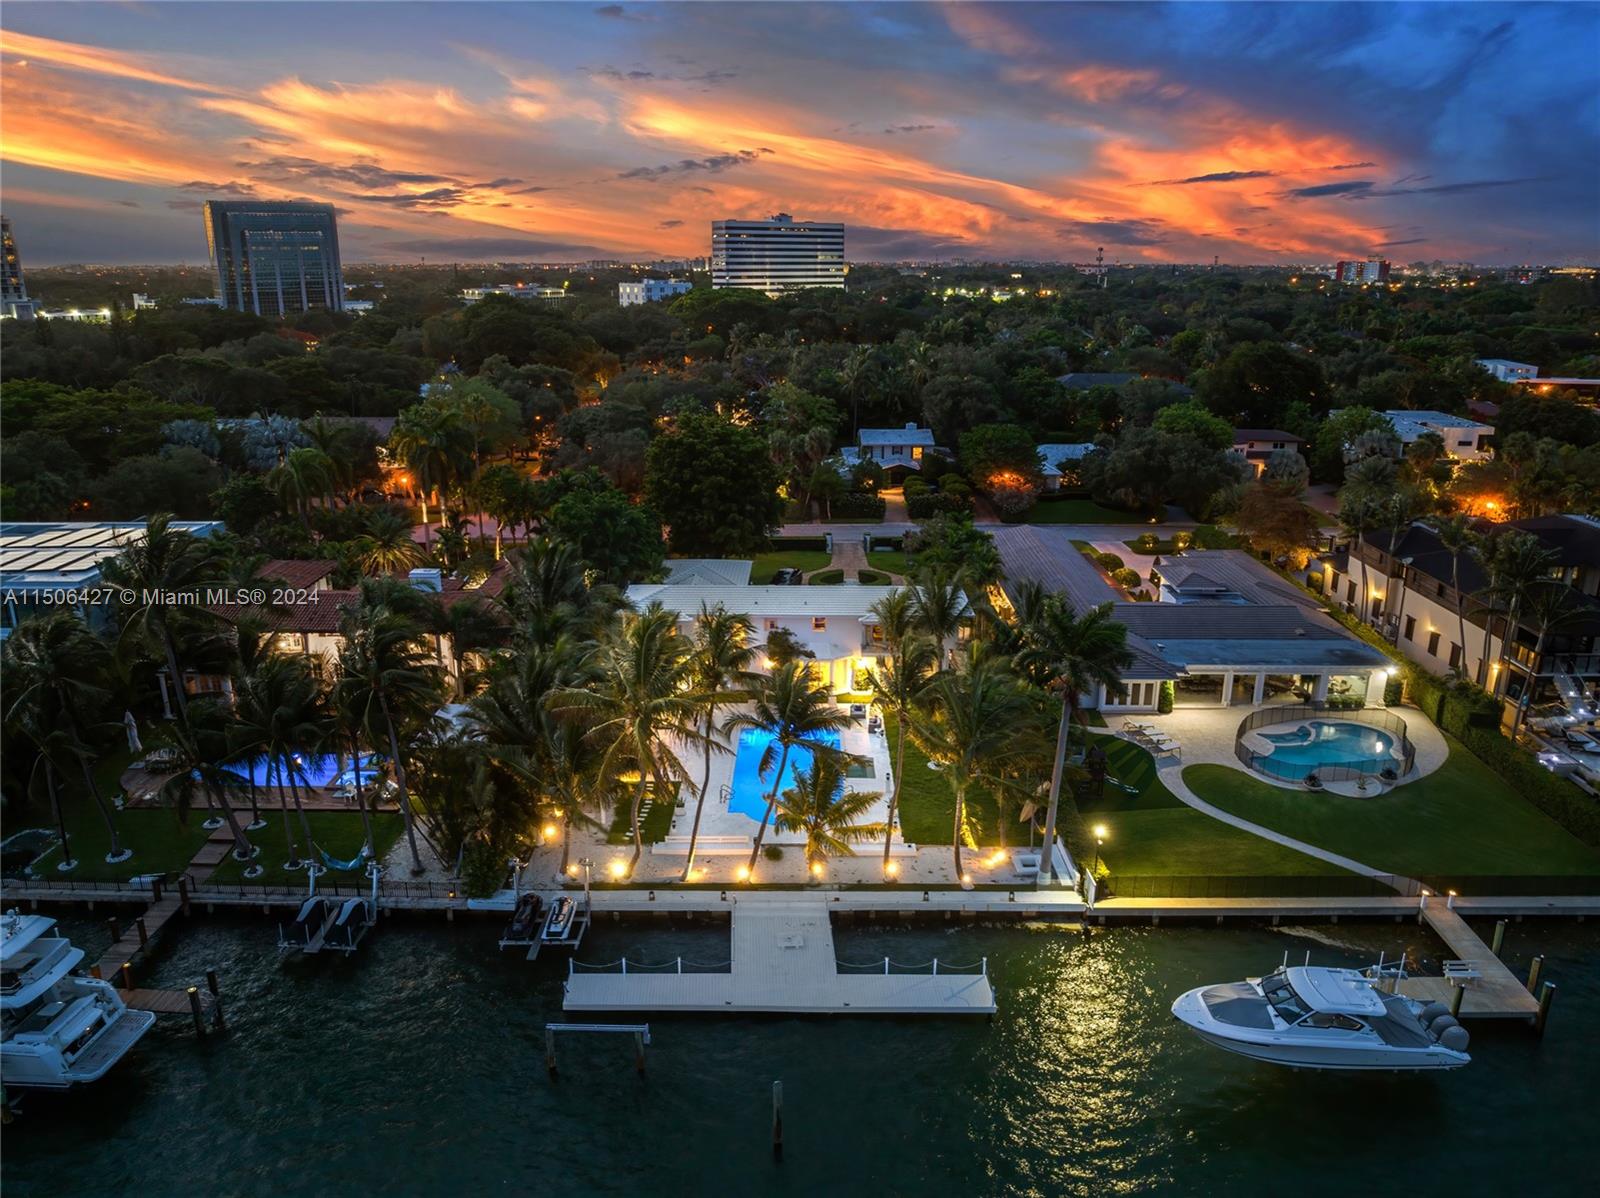 Introducing 610 Sabal Palm Rd. Located Within The Ultra-exclusive, Gated Community Of Bay Point. 610 Sabal Palm Rd Is In A Perfect Position To Enjoy The Best Views Of The Open Bay, Beautiful Skyline Of Downtown, And More. The Desirable, Large Lot Has 22,800 sq ft With 100 ft Of Water Frontage. There Is Enough Depth For Yachts Or Boats With Inboard Engine Options. Current Home Has Split Four Bedroom, Four Bathroom Layout With Two Car Garage. Conveniently Located Close To Design District, Downtown/Brickell, Airport, And Beach. Bay Point Offers 24 Hour Security Patrol, Guarded Gate, And Only Invited Guests Are Allowed Entry.